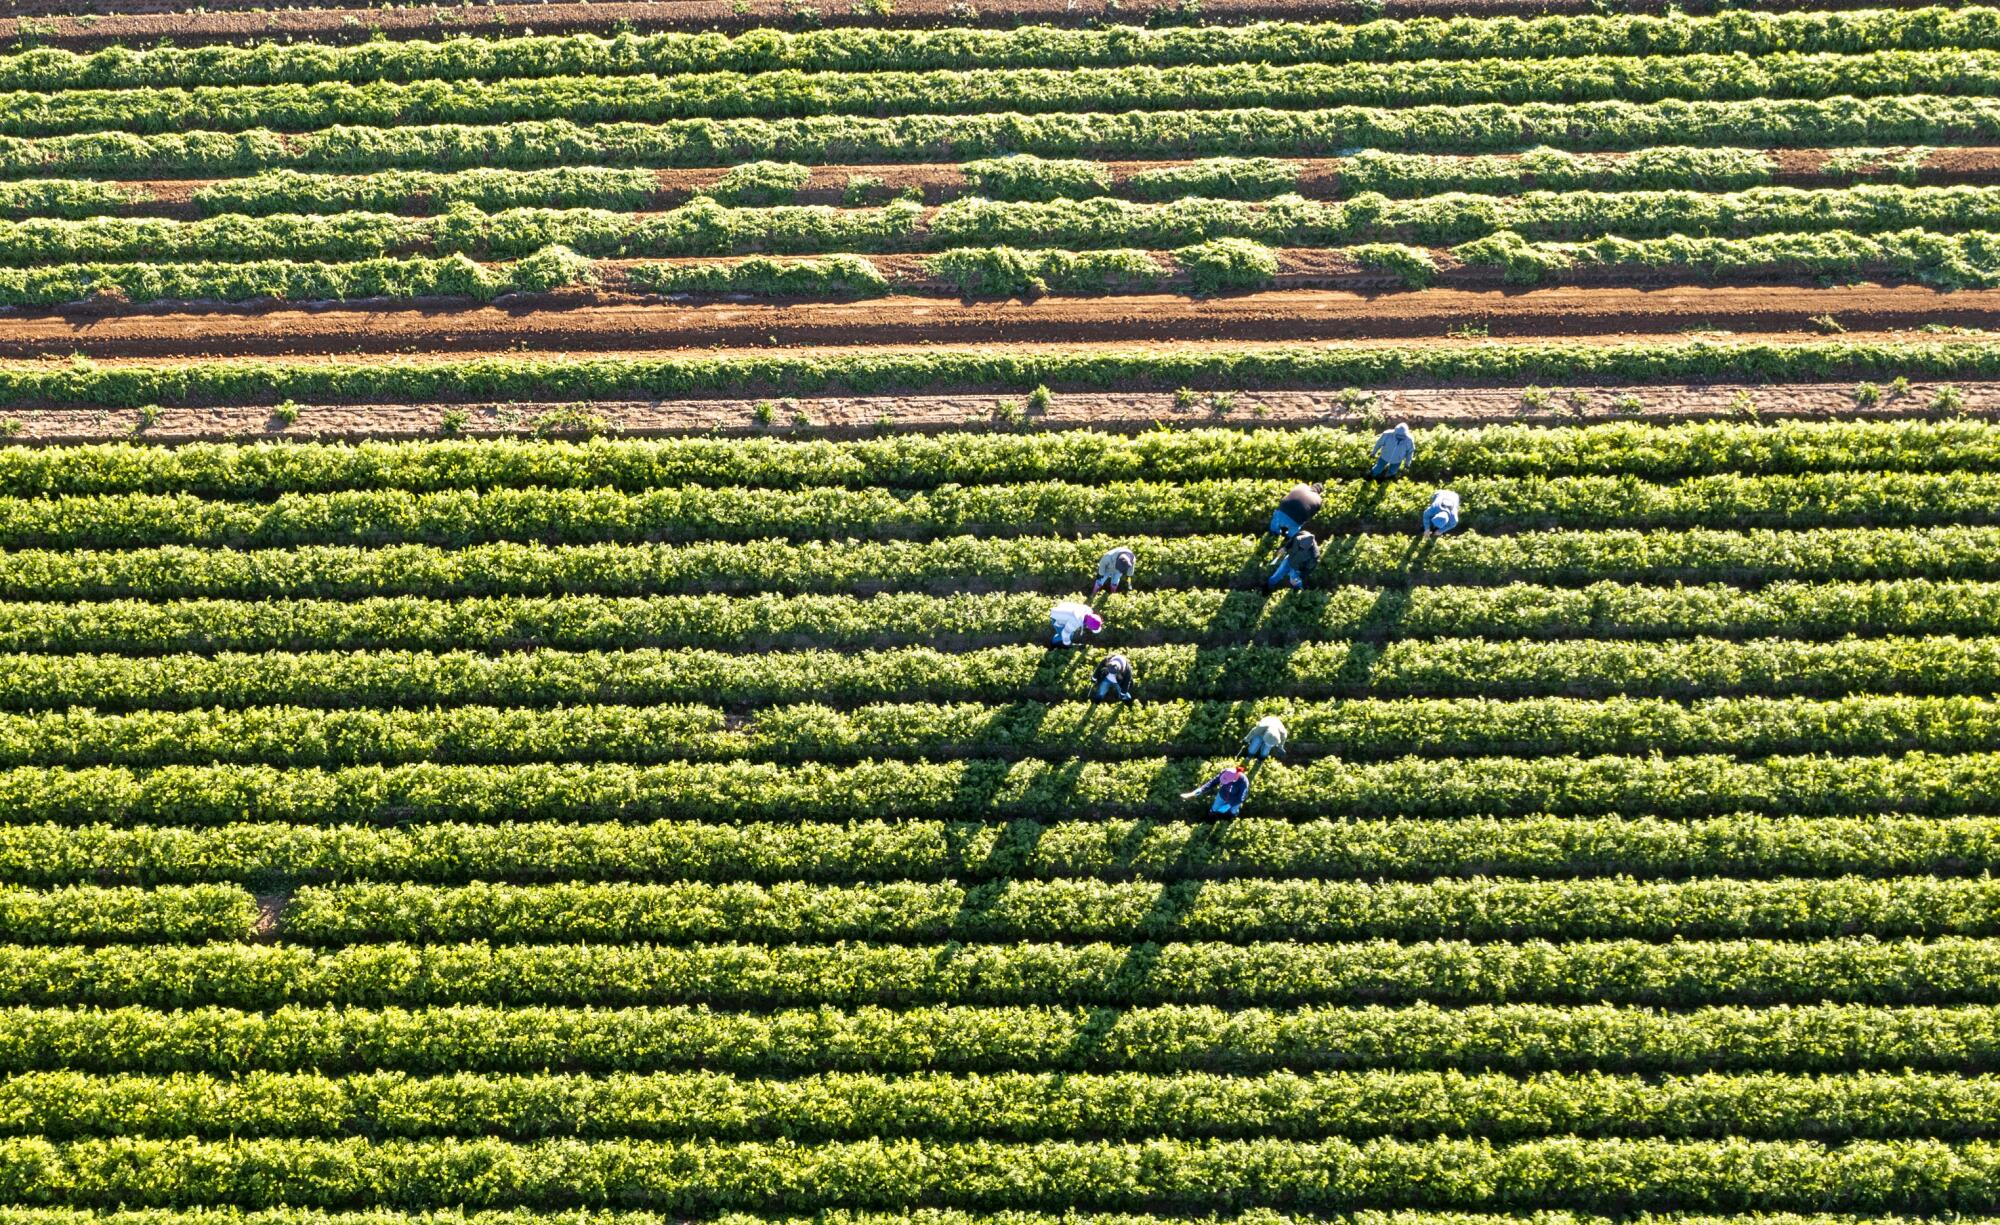 An aerial views of farm workers in a field.